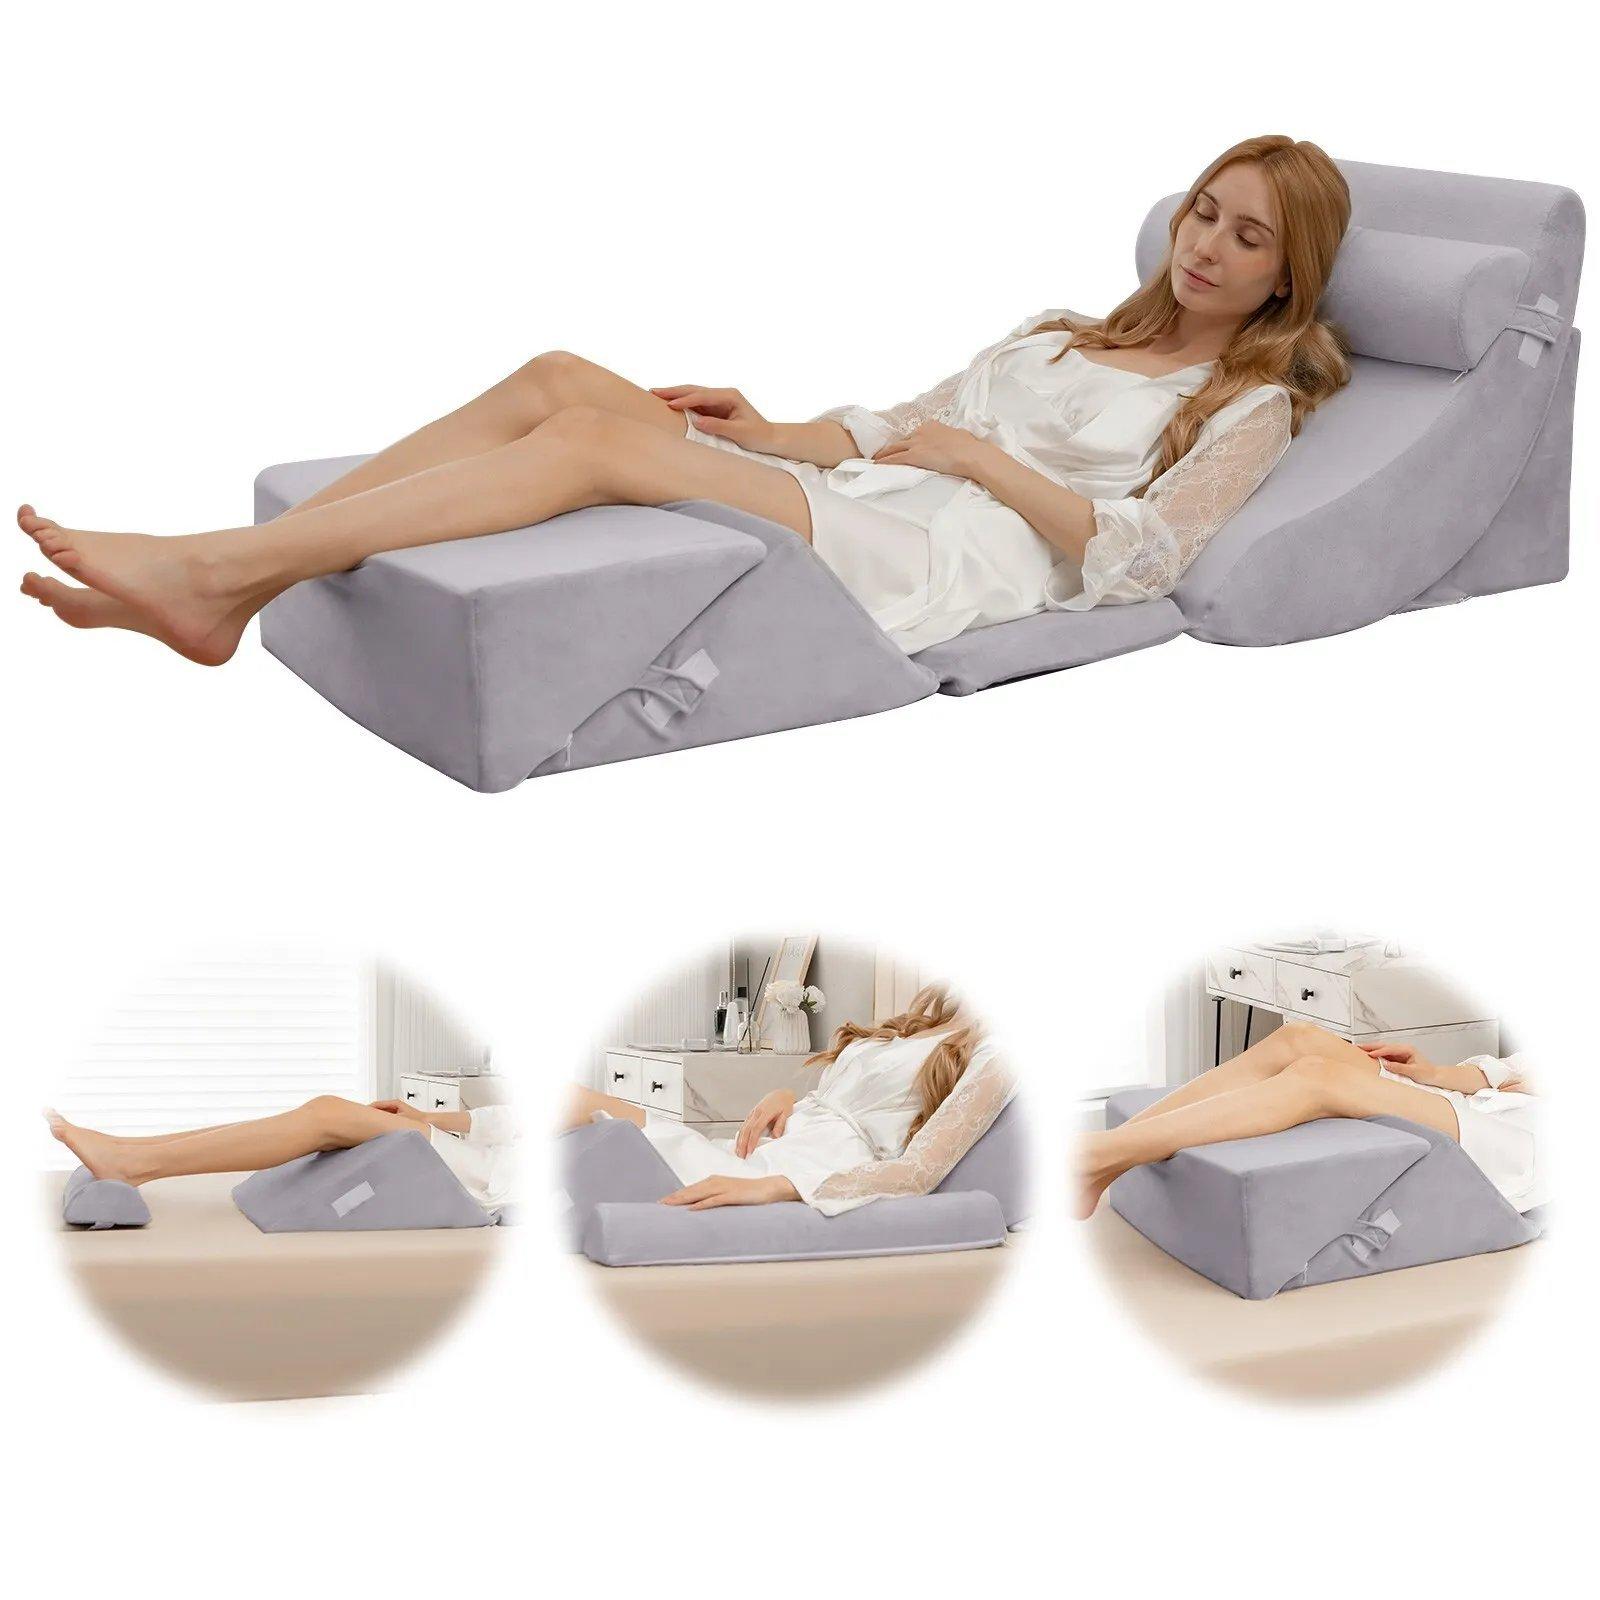 6PCS Bed Wedge Pillow Set Orthopedic Adjustable Foam Pillow for Pain Relief